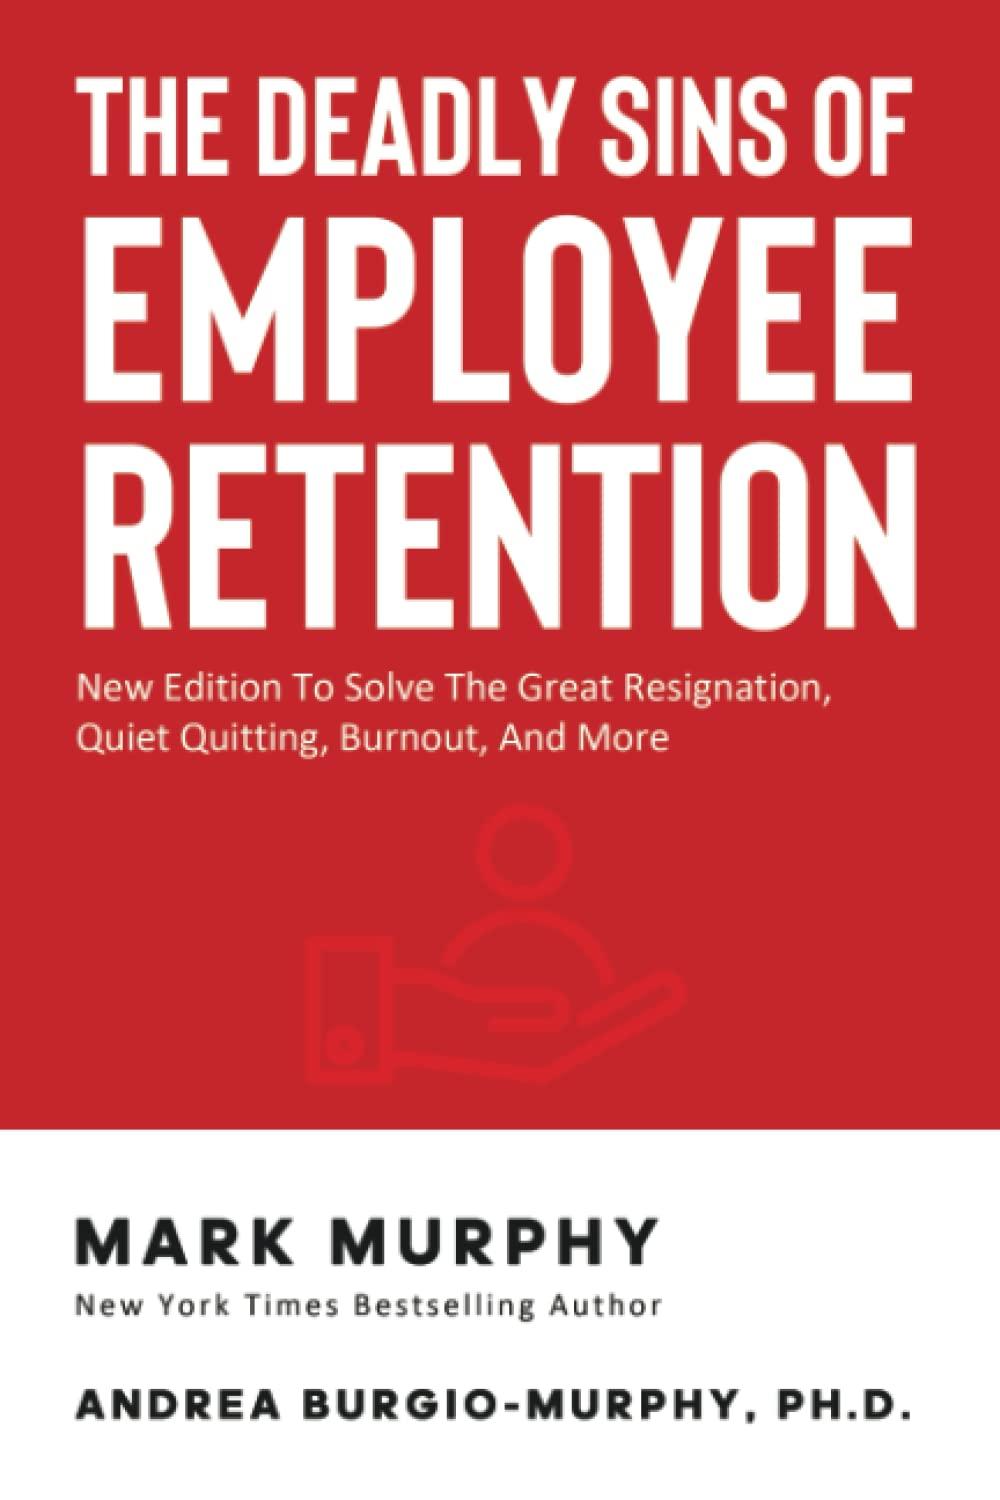 the deadly sins of employee retention new edition to solve the great resignation quiet quitting burnout and